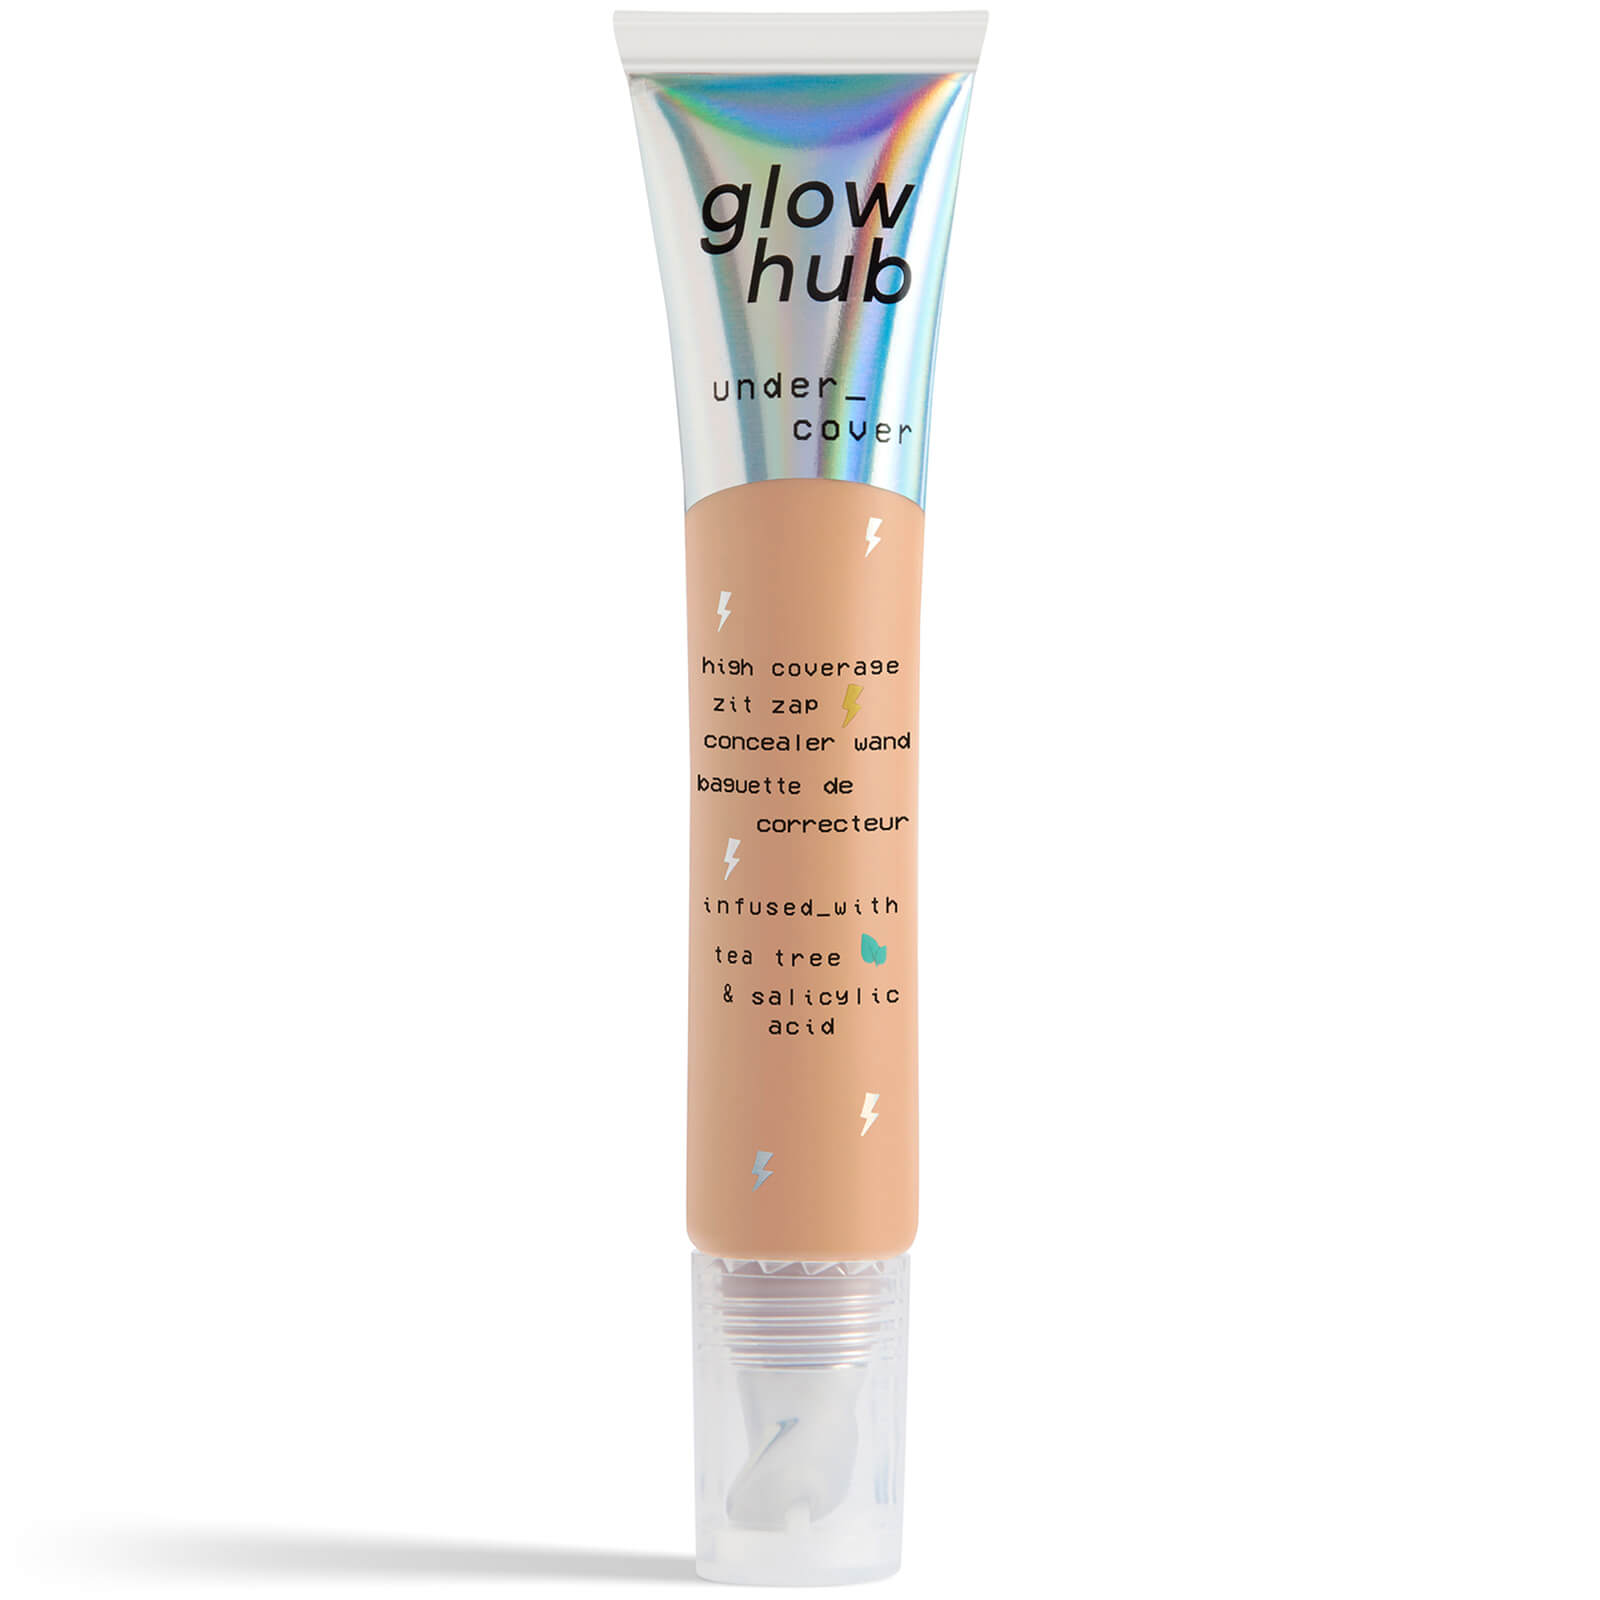 Glow Hub Under Cover High Coverage Zit Zap Concealer Wand 15ml (Various Shades) - 14C